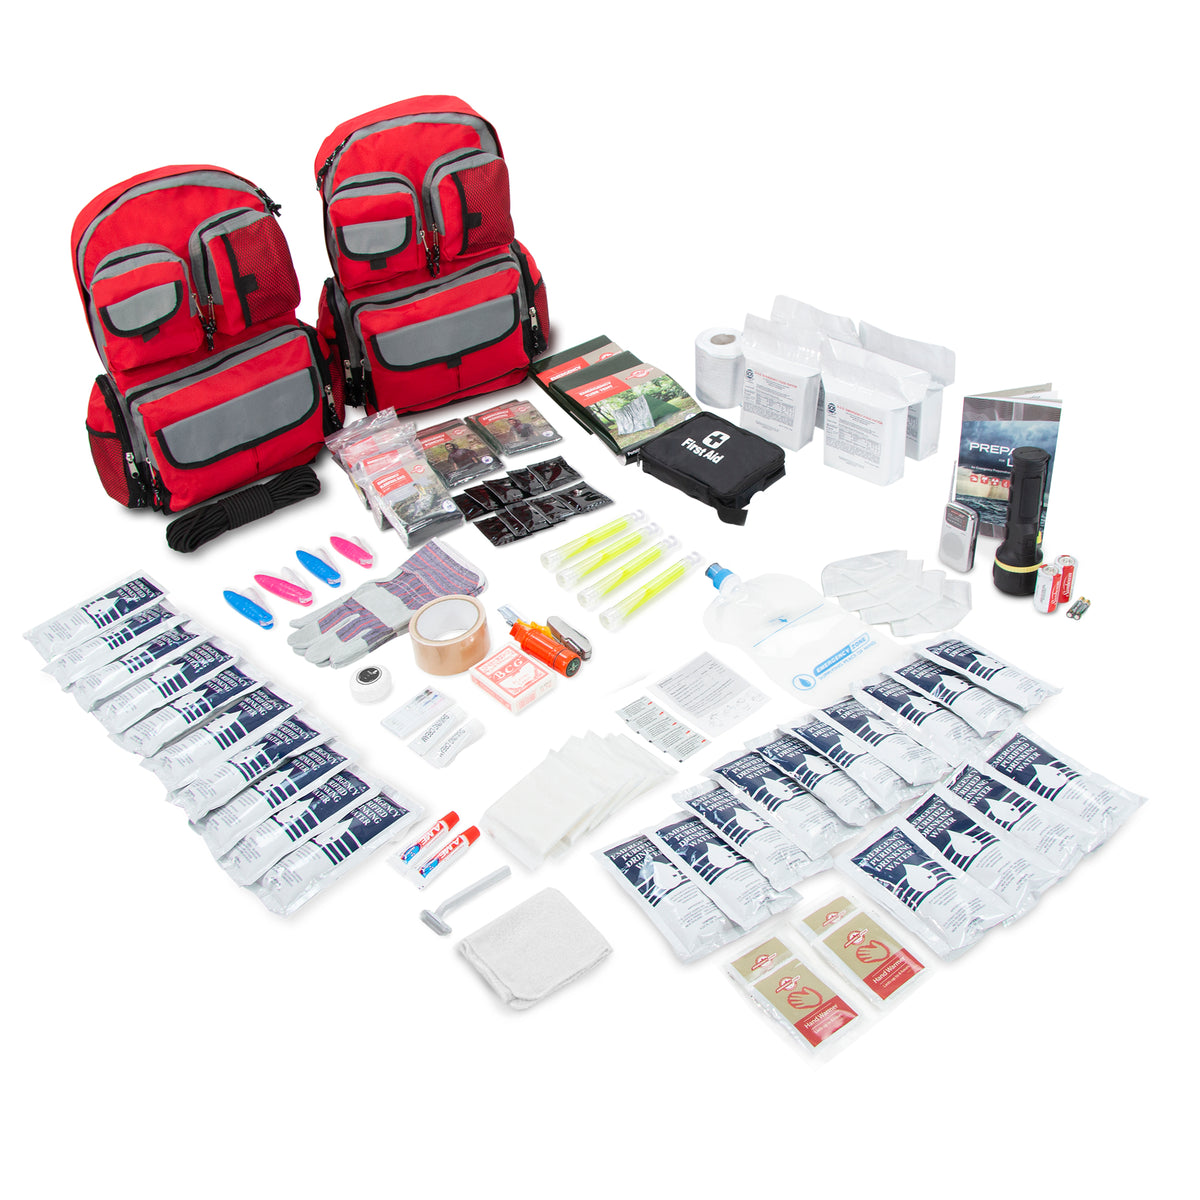 Deluxe 2-Person Survival Kit for Emergency Disaster Preparedness for  Earthquake, Hurricane, Fire, Evacuations, Auto, Home and Family